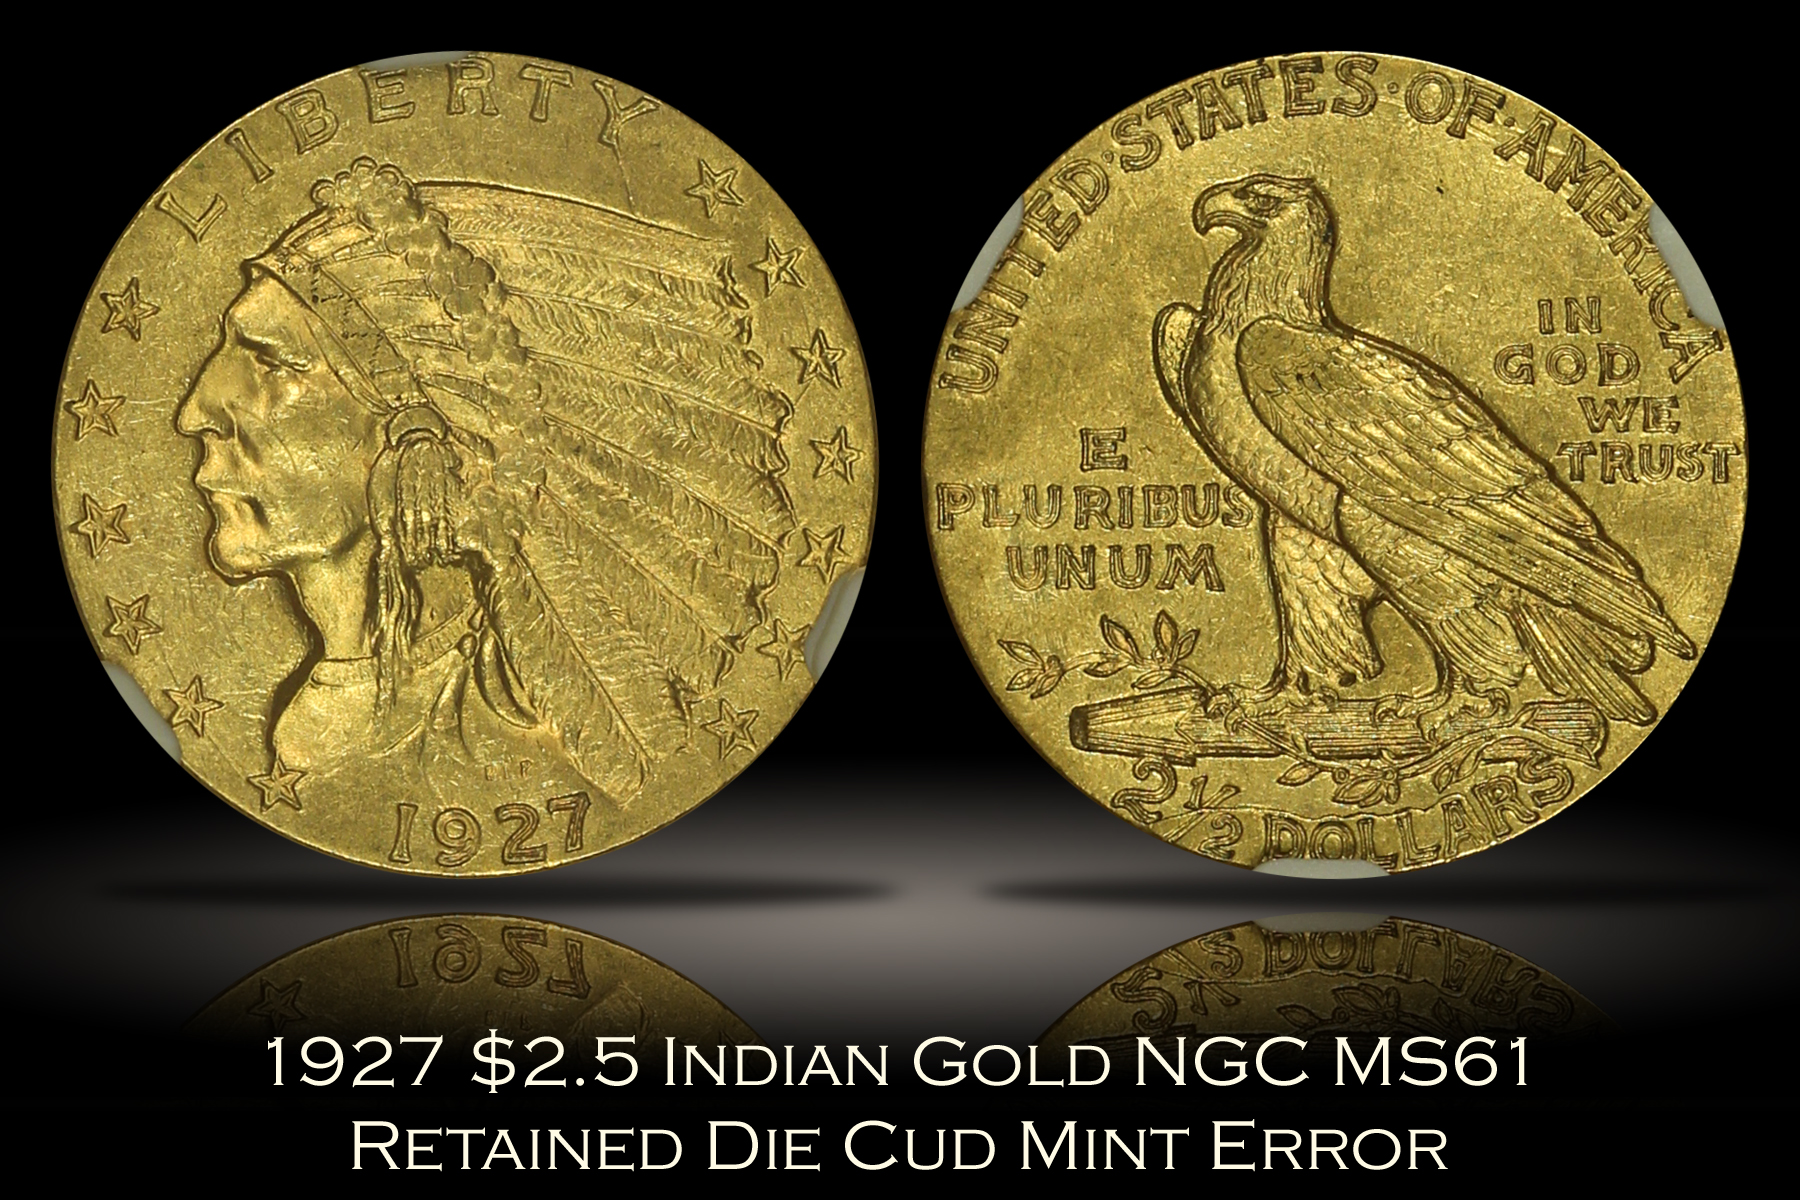 1927 $2.5 Indian Gold NGC MS61 Retained Die Cud Error